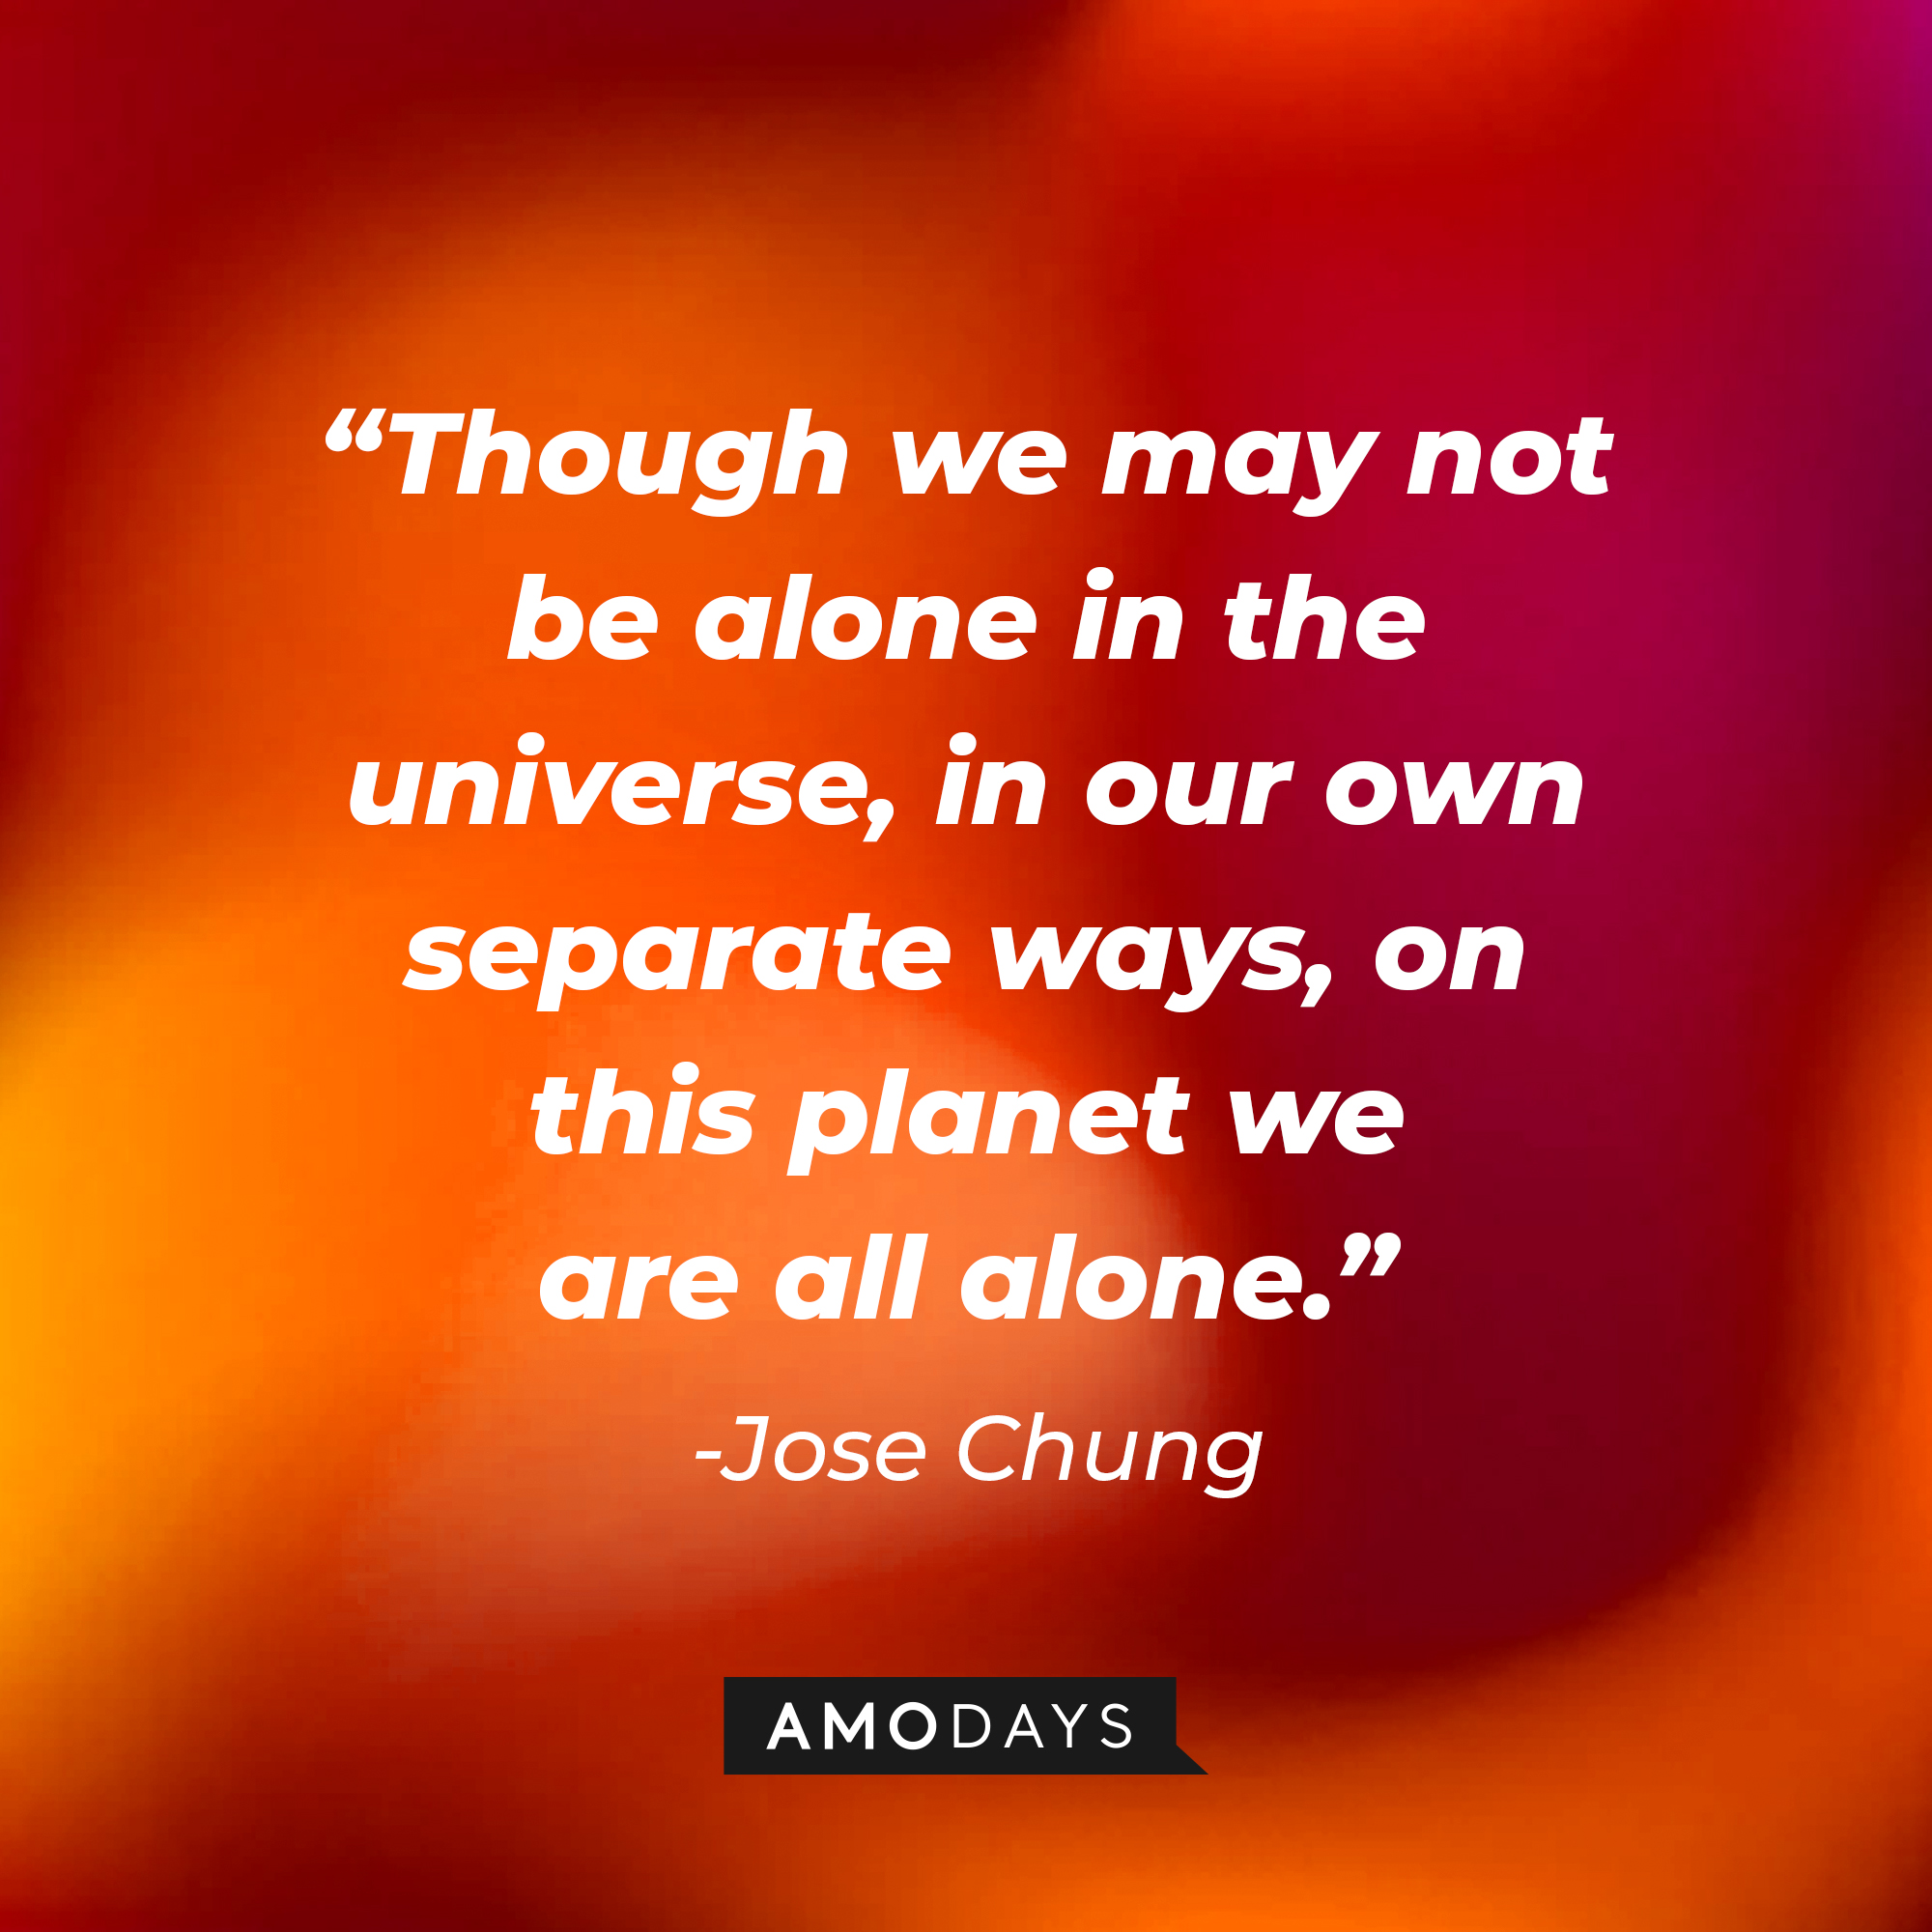 Jose Chung's quote: "Though we may not be alone in the universe, in our own separate ways, on this planet we are all alone." | Source: AmoDays